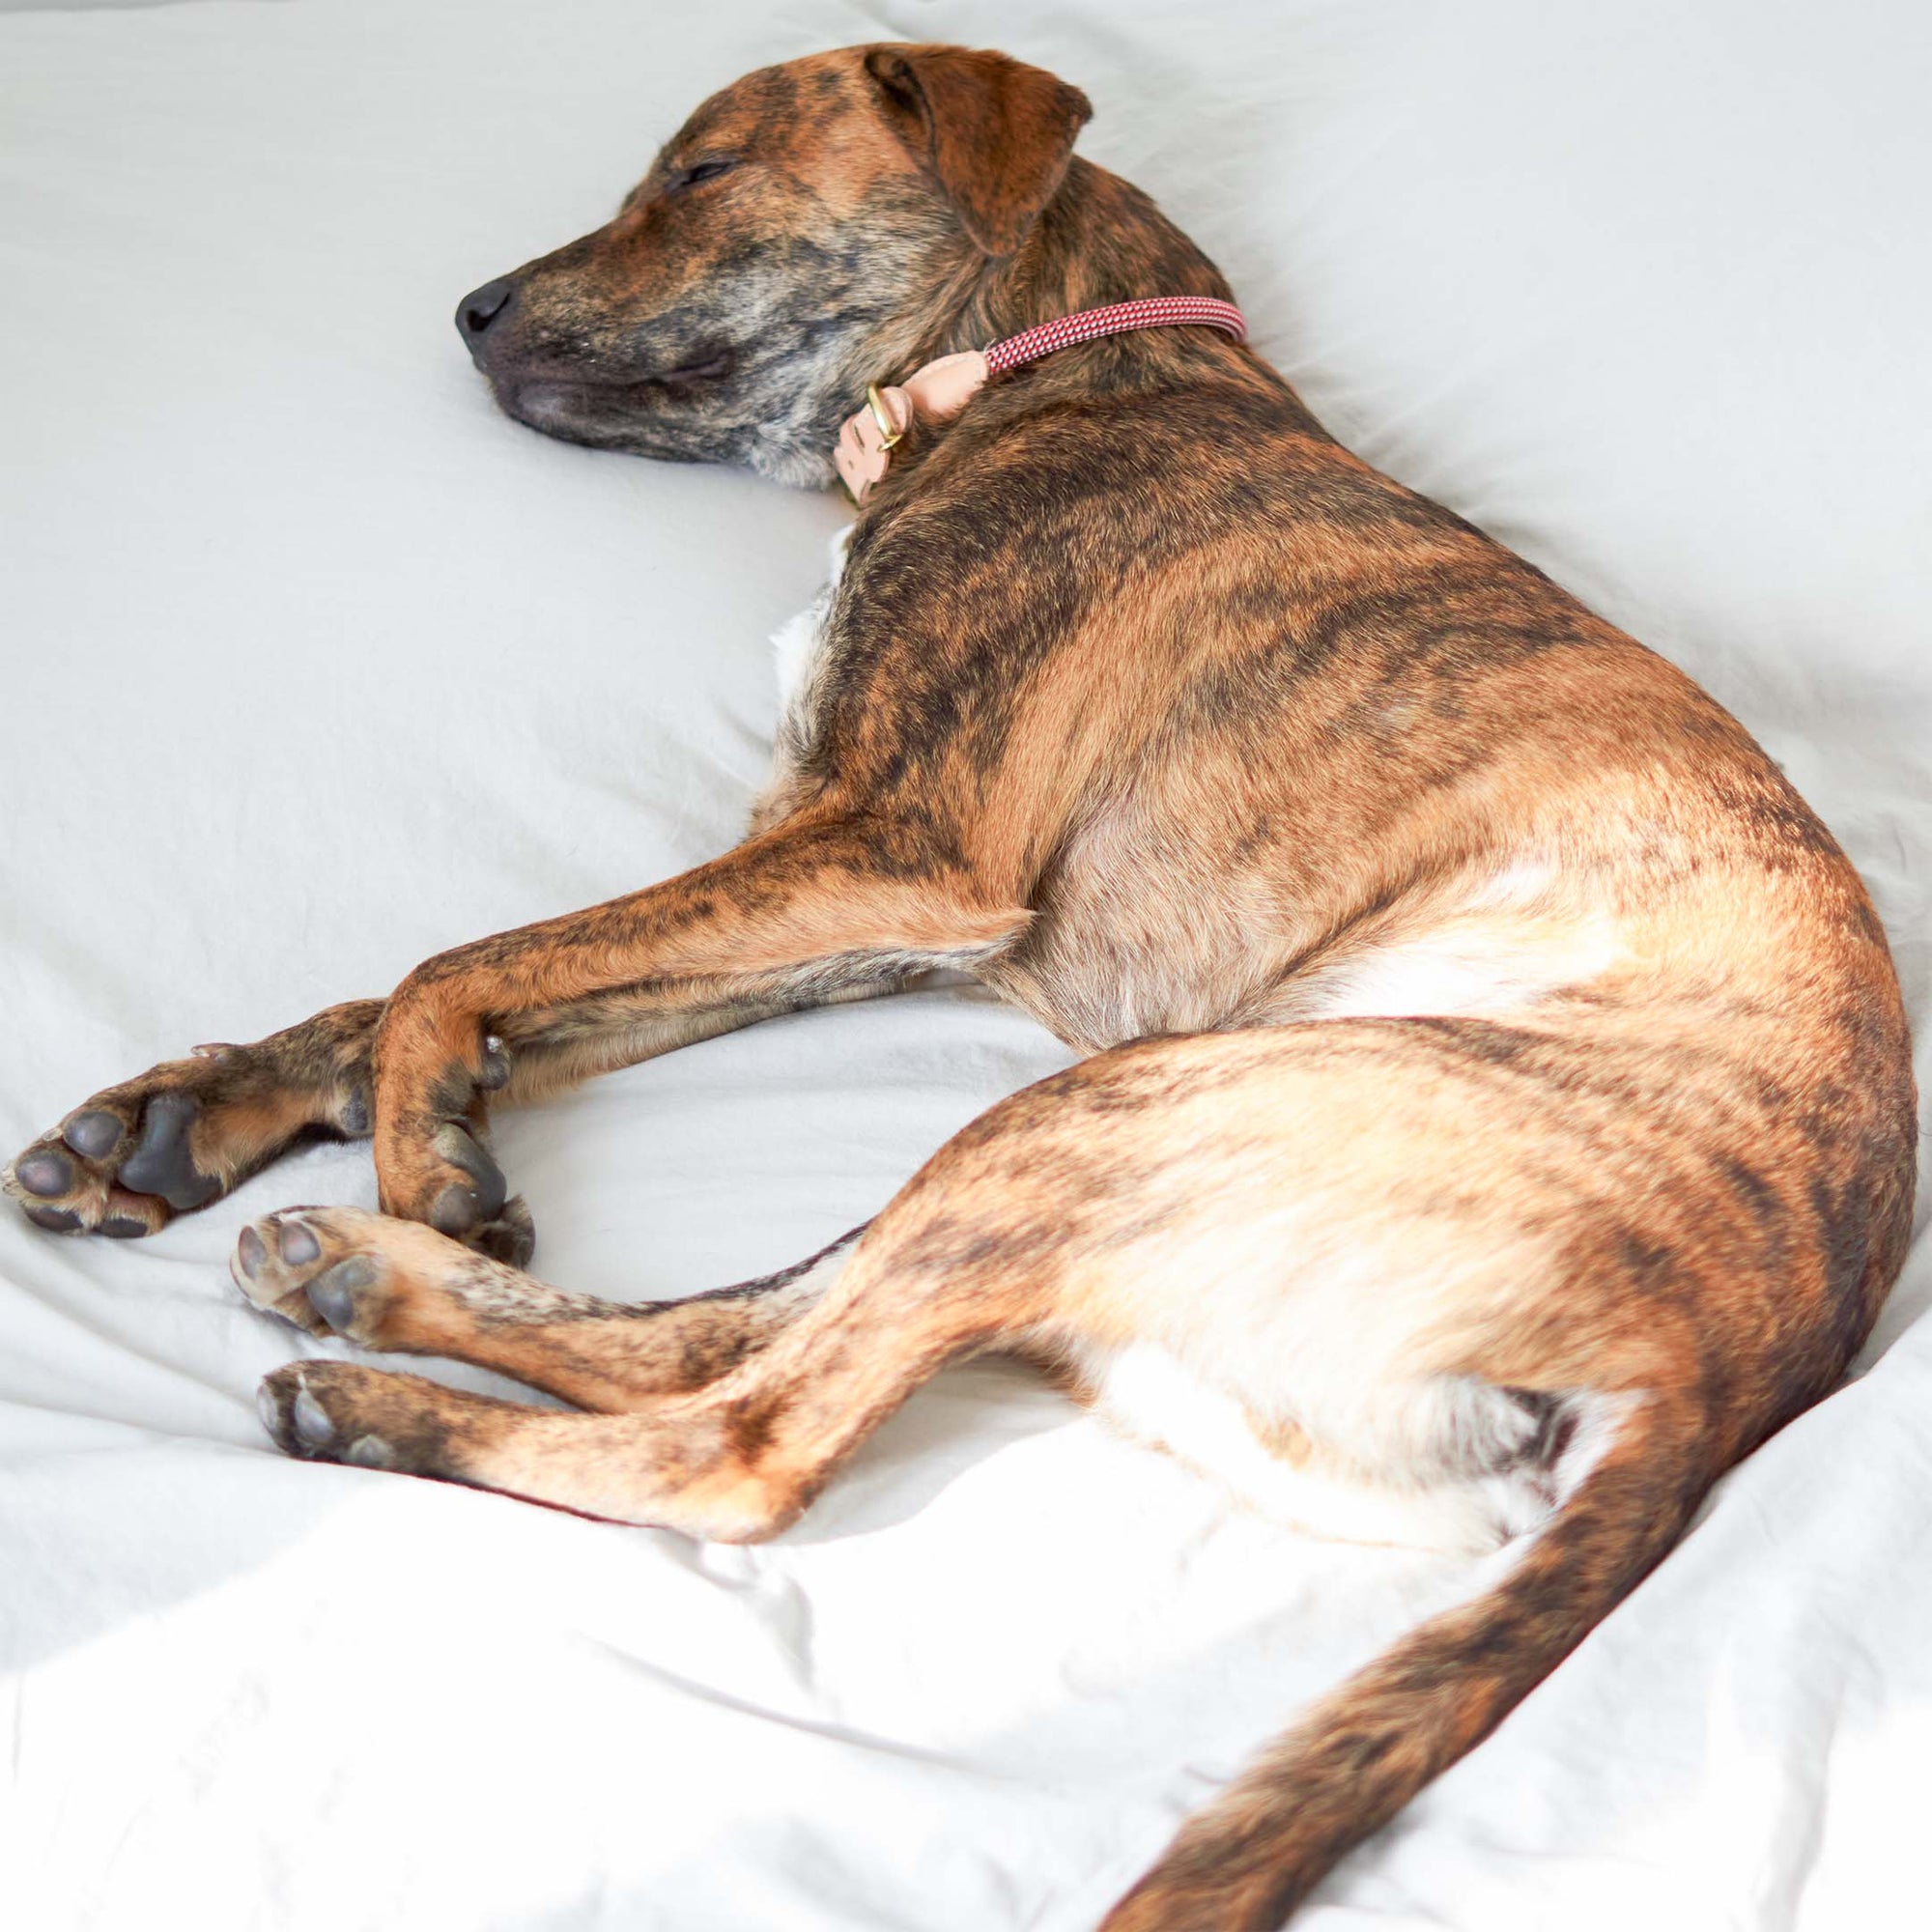 The image captures a brindle dog lying down comfortably on a white sheet. The dog is relaxed and appears to be sleeping. It's wearing a pink collar with a subtle pattern and a tan leather tag that might be from "The Furryfolks" collection, consistent with the branding seen in the previous images. The overall scene conveys a sense of tranquility and restfulness.